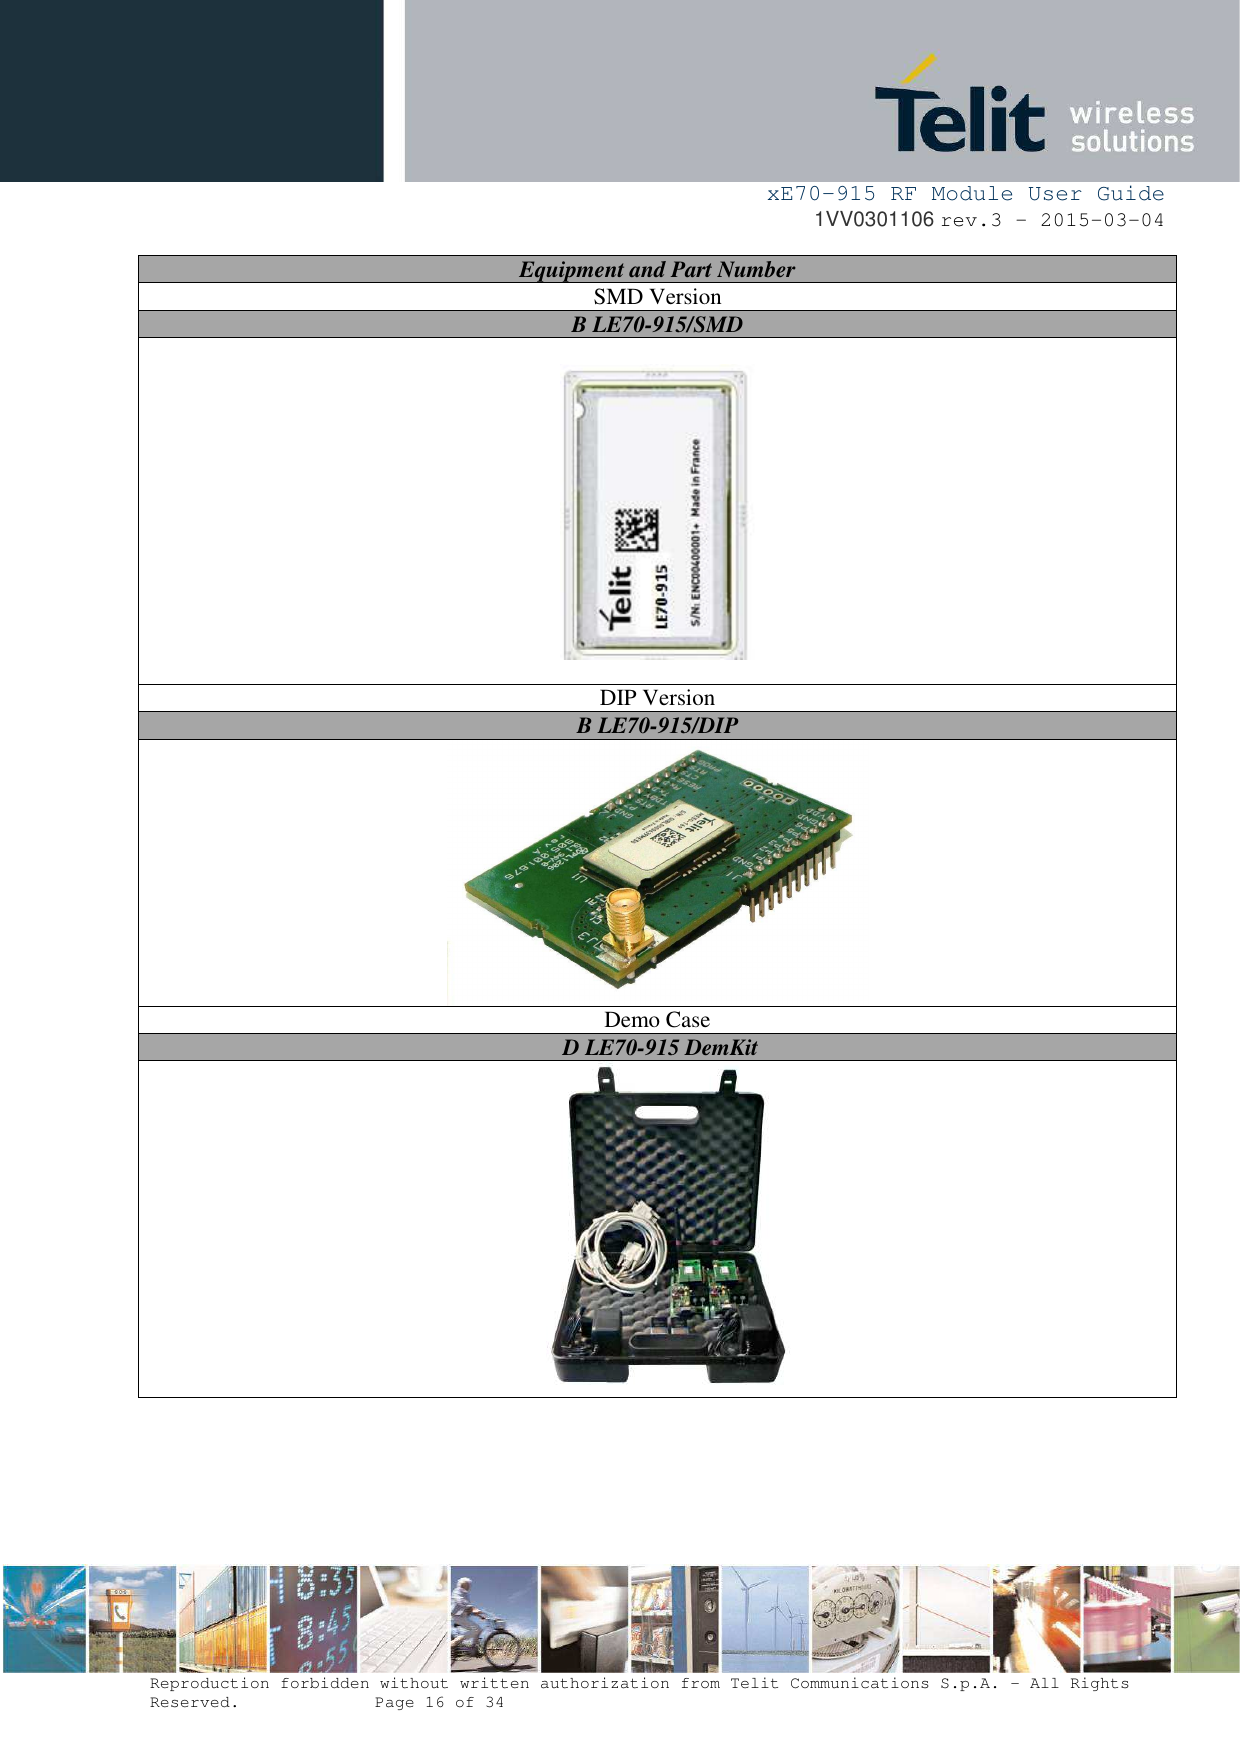     xE70-915 RF Module User Guide 1VV0301106 rev.3 – 2015-03-04  Reproduction forbidden without written authorization from Telit Communications S.p.A. - All Rights Reserved.    Page 16 of 34  Equipment and Part Number SMD Version B LE70-915/SMD    DIP Version B LE70-915/DIP  Demo Case  D LE70-915 DemKit  